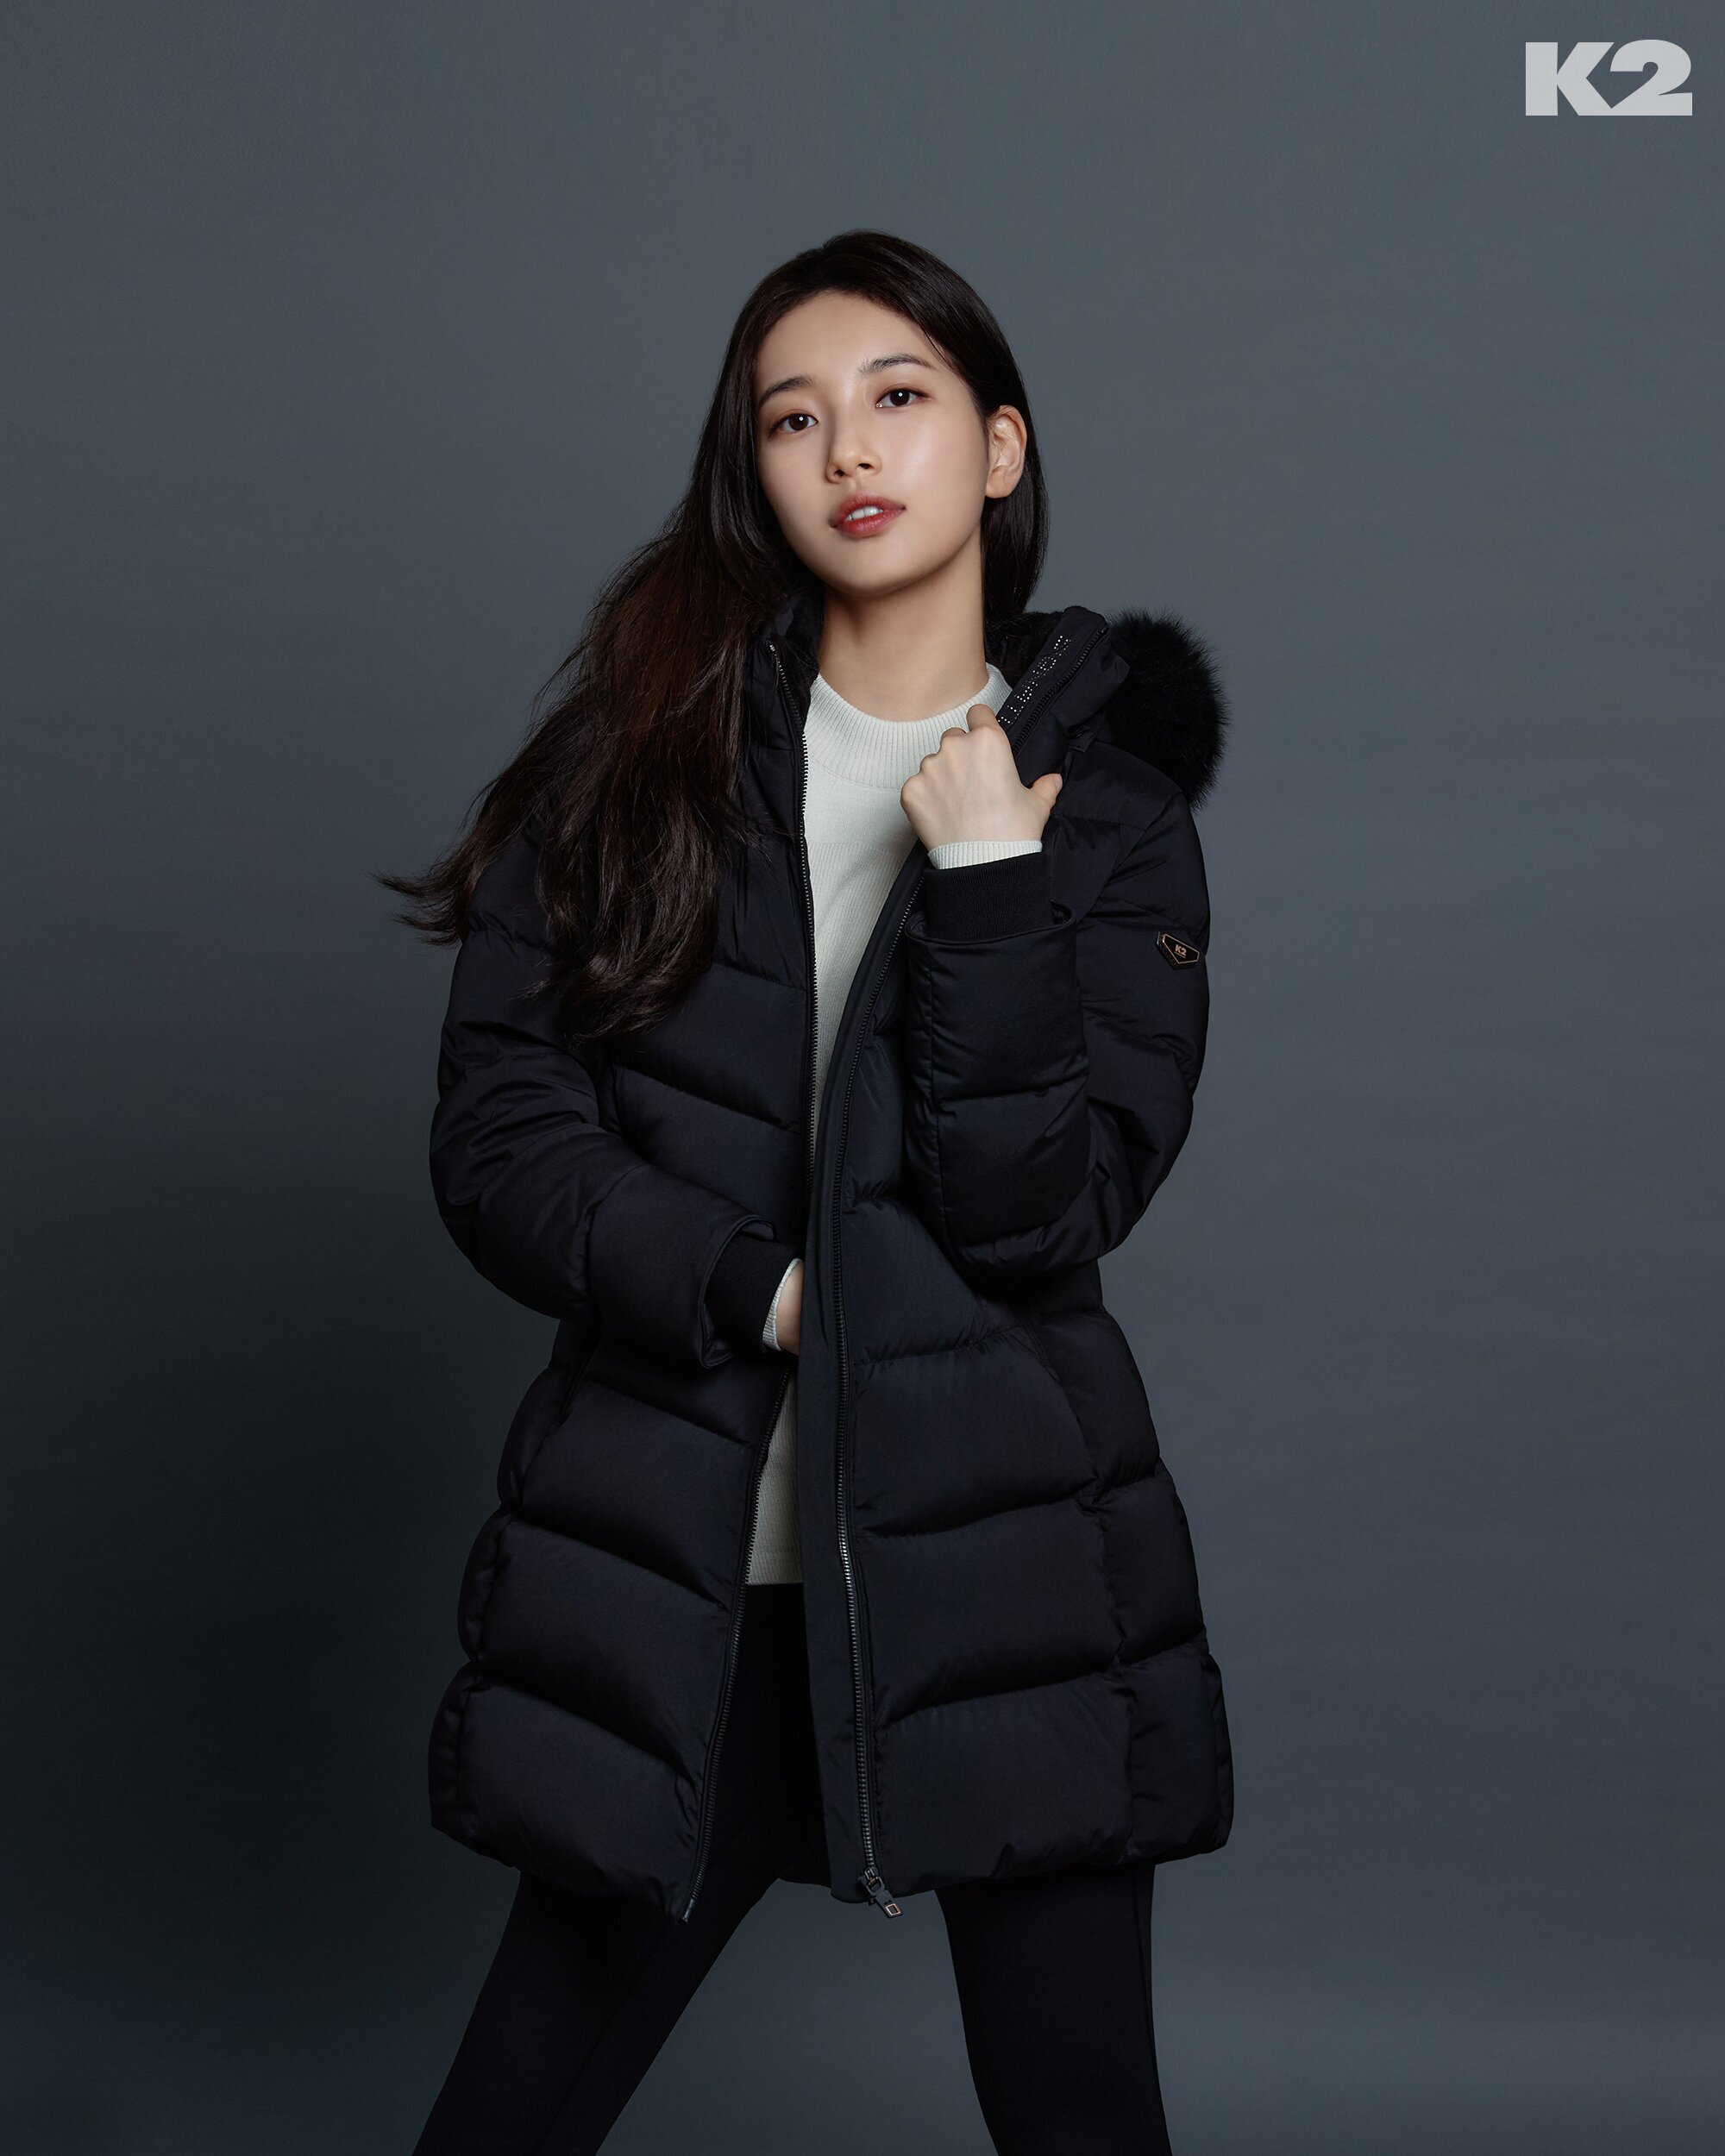 Bae Suzy for K2 2021 Winter 'Thin Air' Collection | kpopping